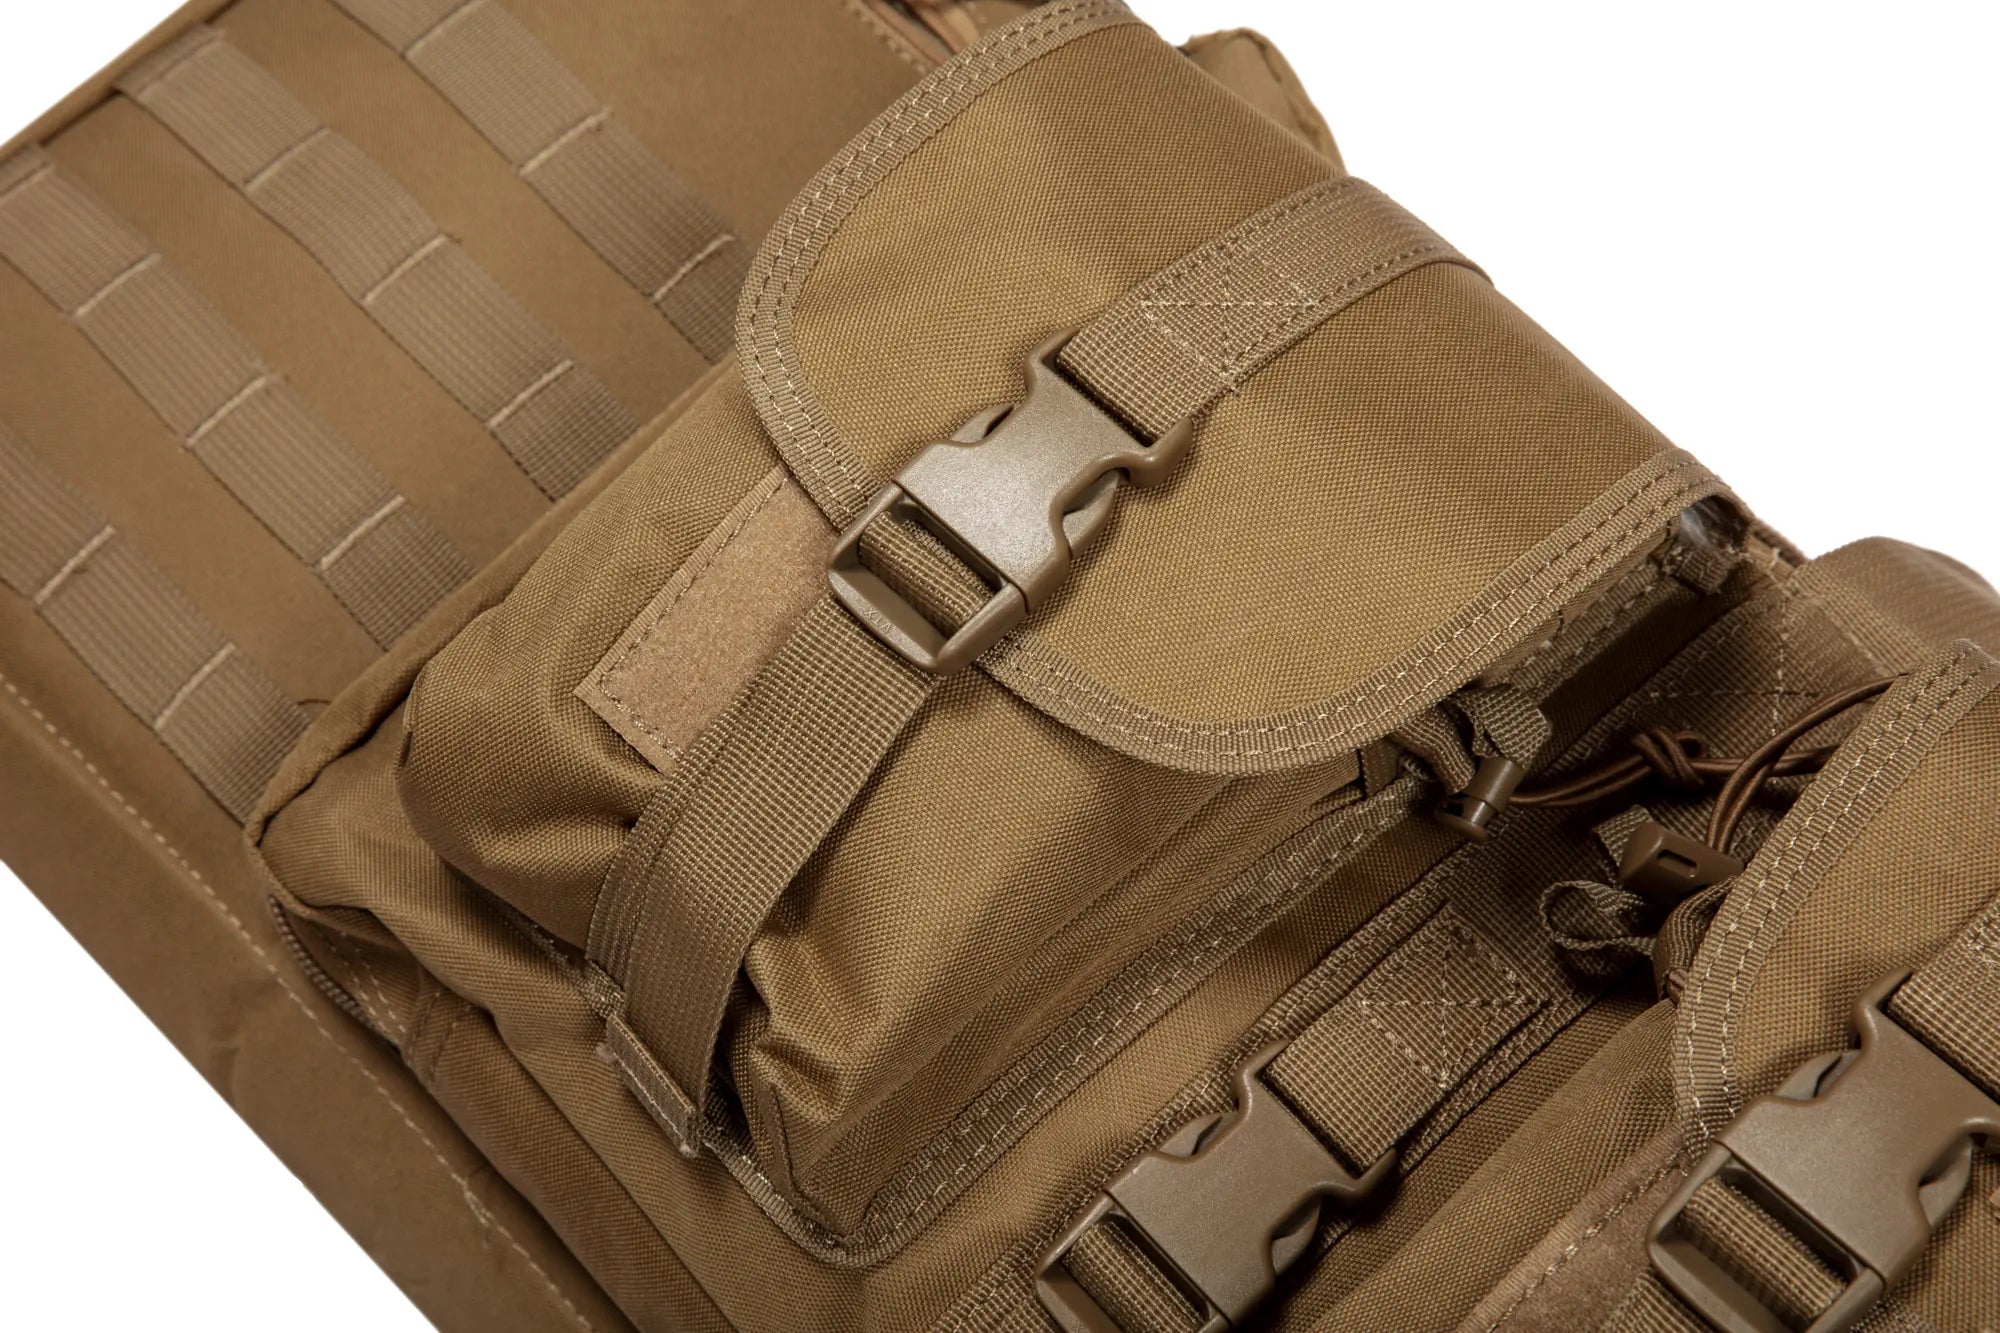 NP PMC Deluxe Soft Double Rifle Bag 42 - Tan"-5